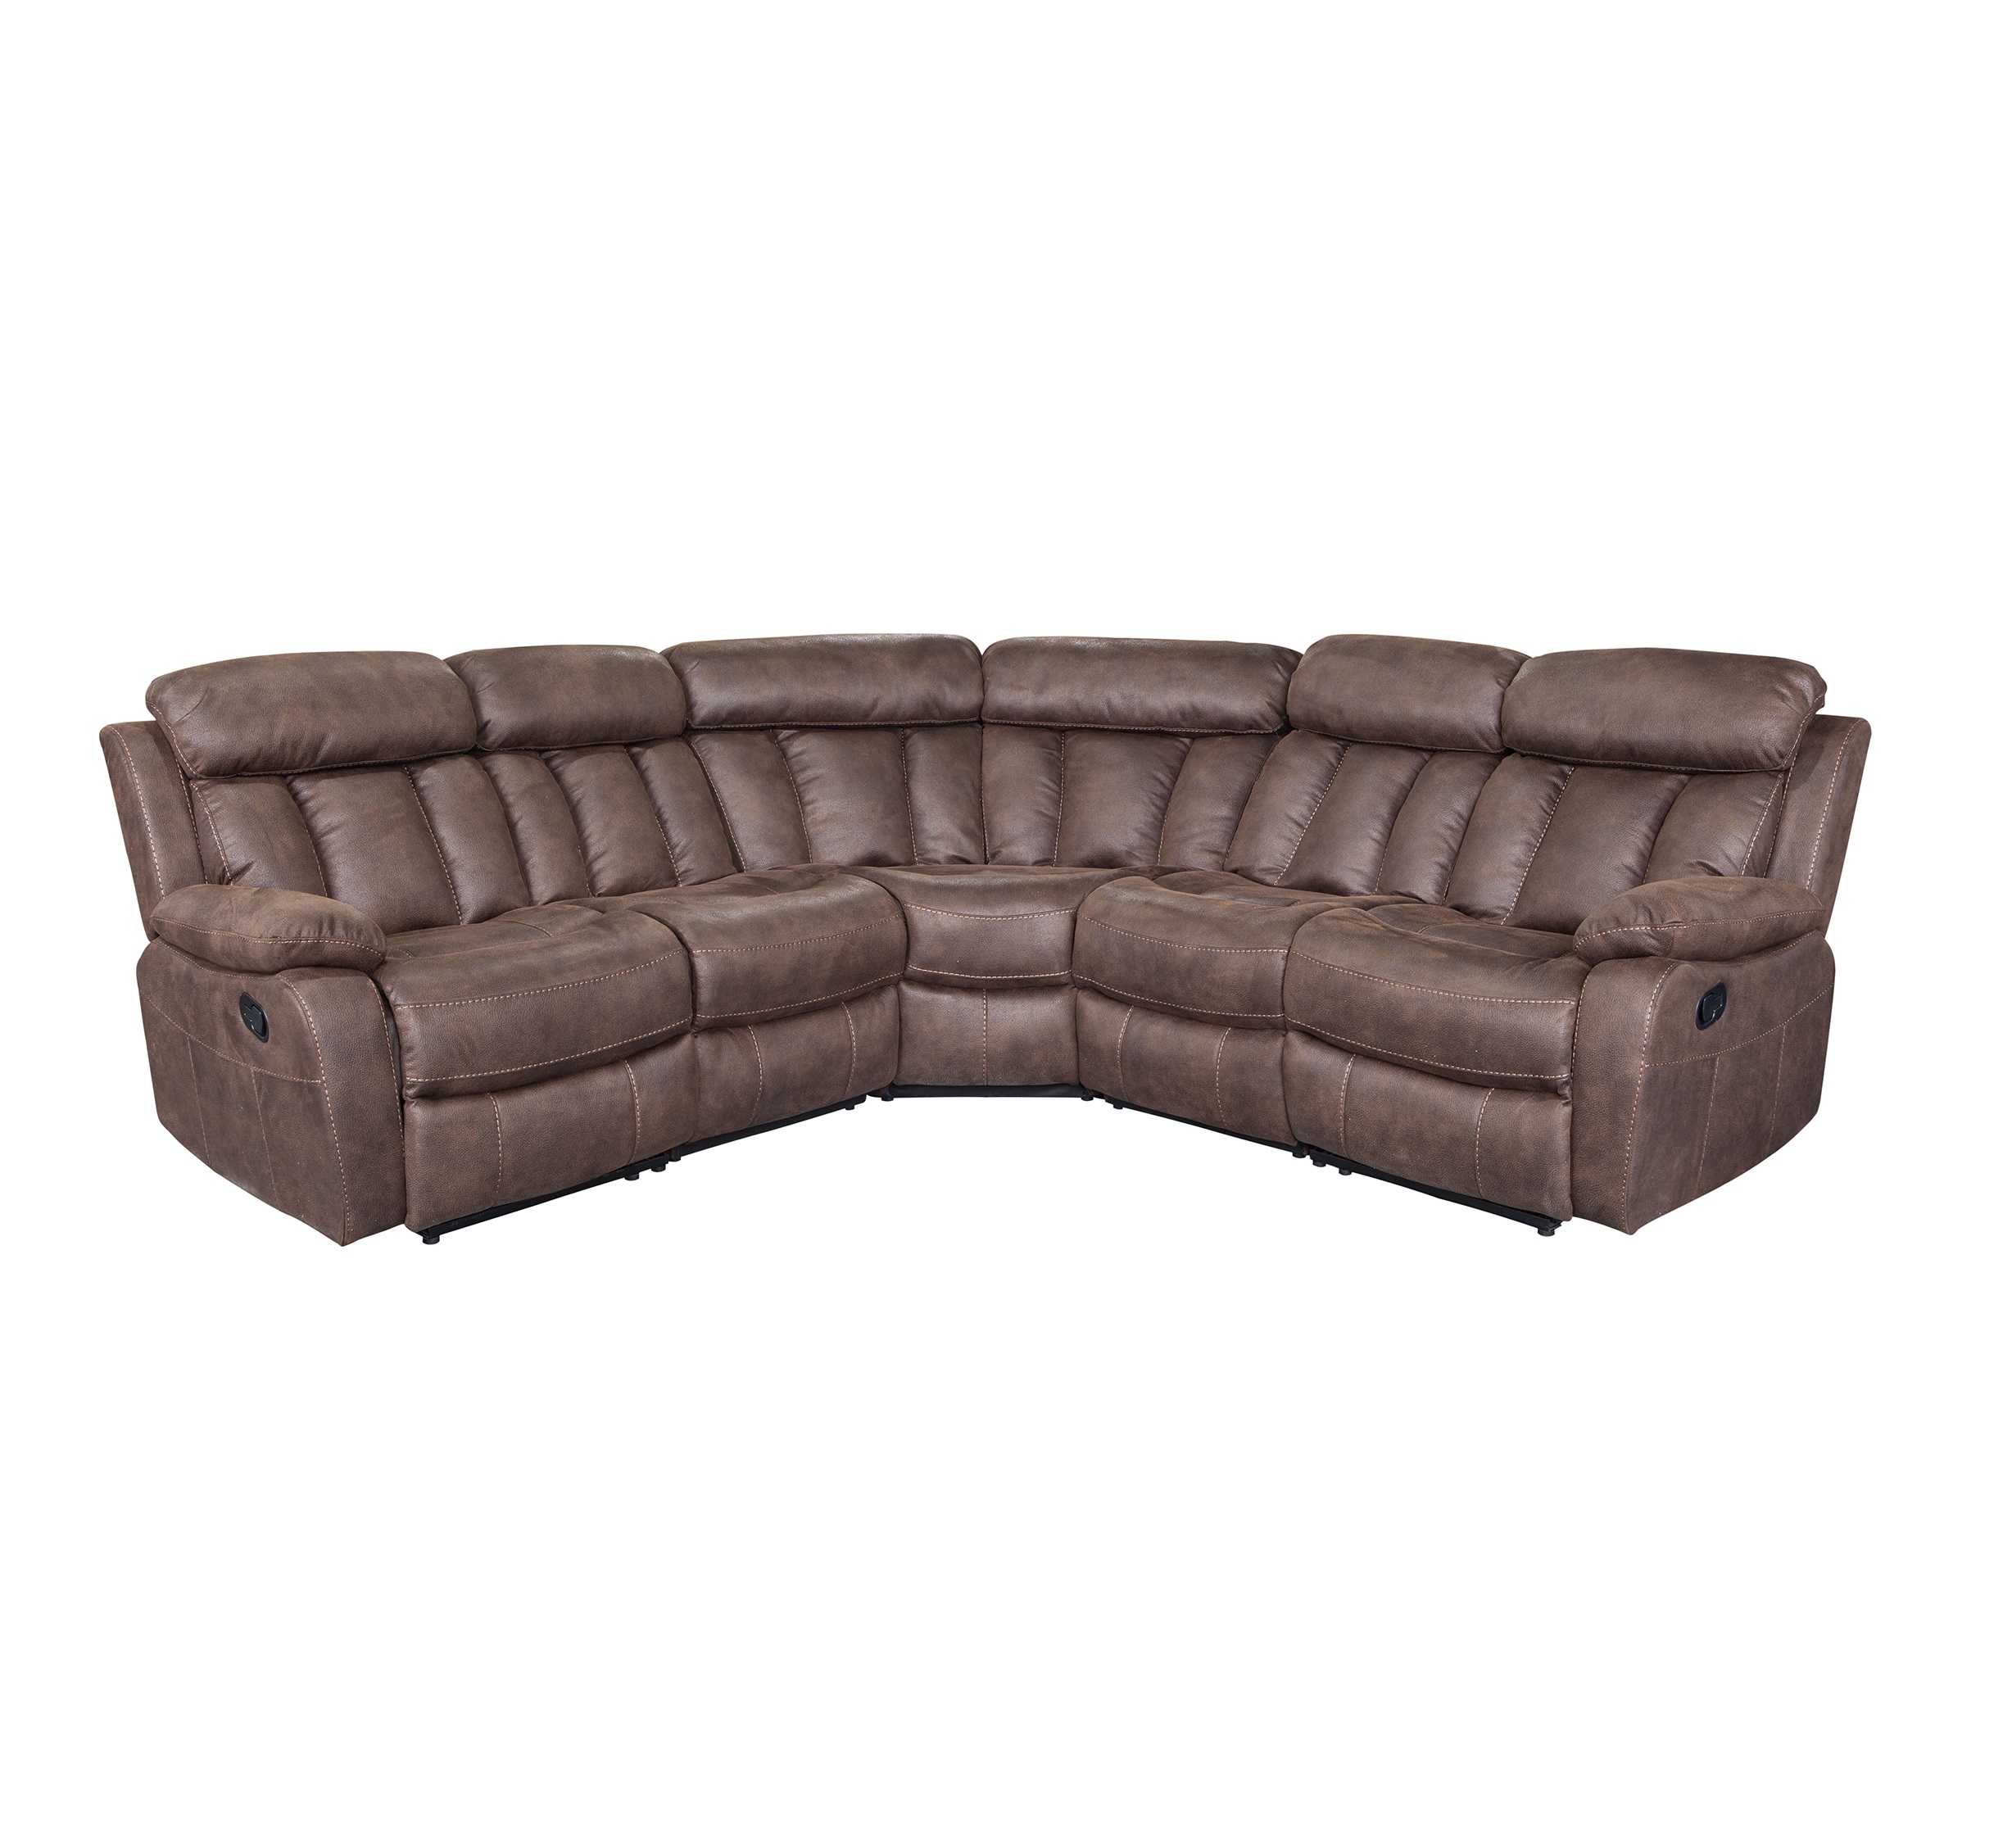 American style leisure 5 seater pu recliner sectional sofa